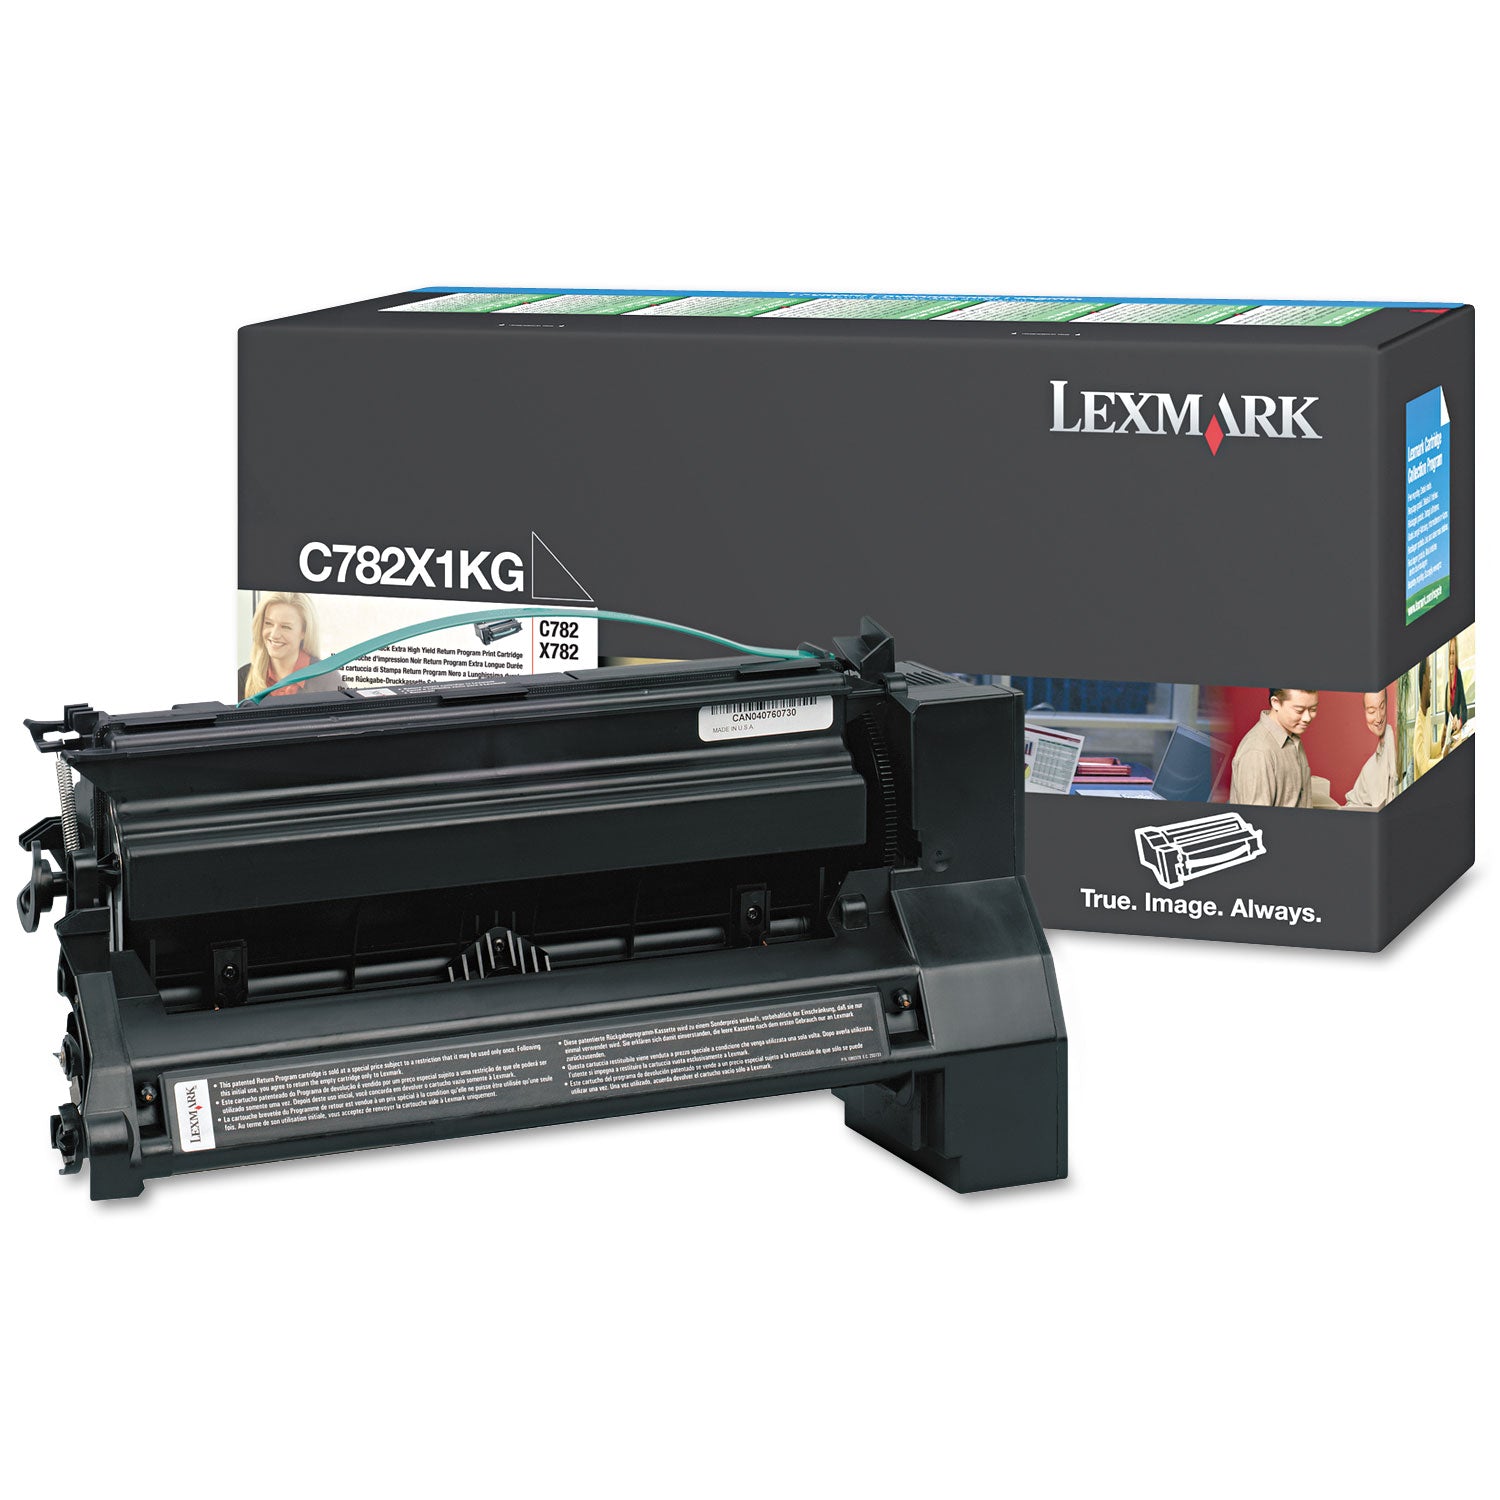 C782X1KG Extra High-Yield Toner, 15,000 Page-Yield, Black - 